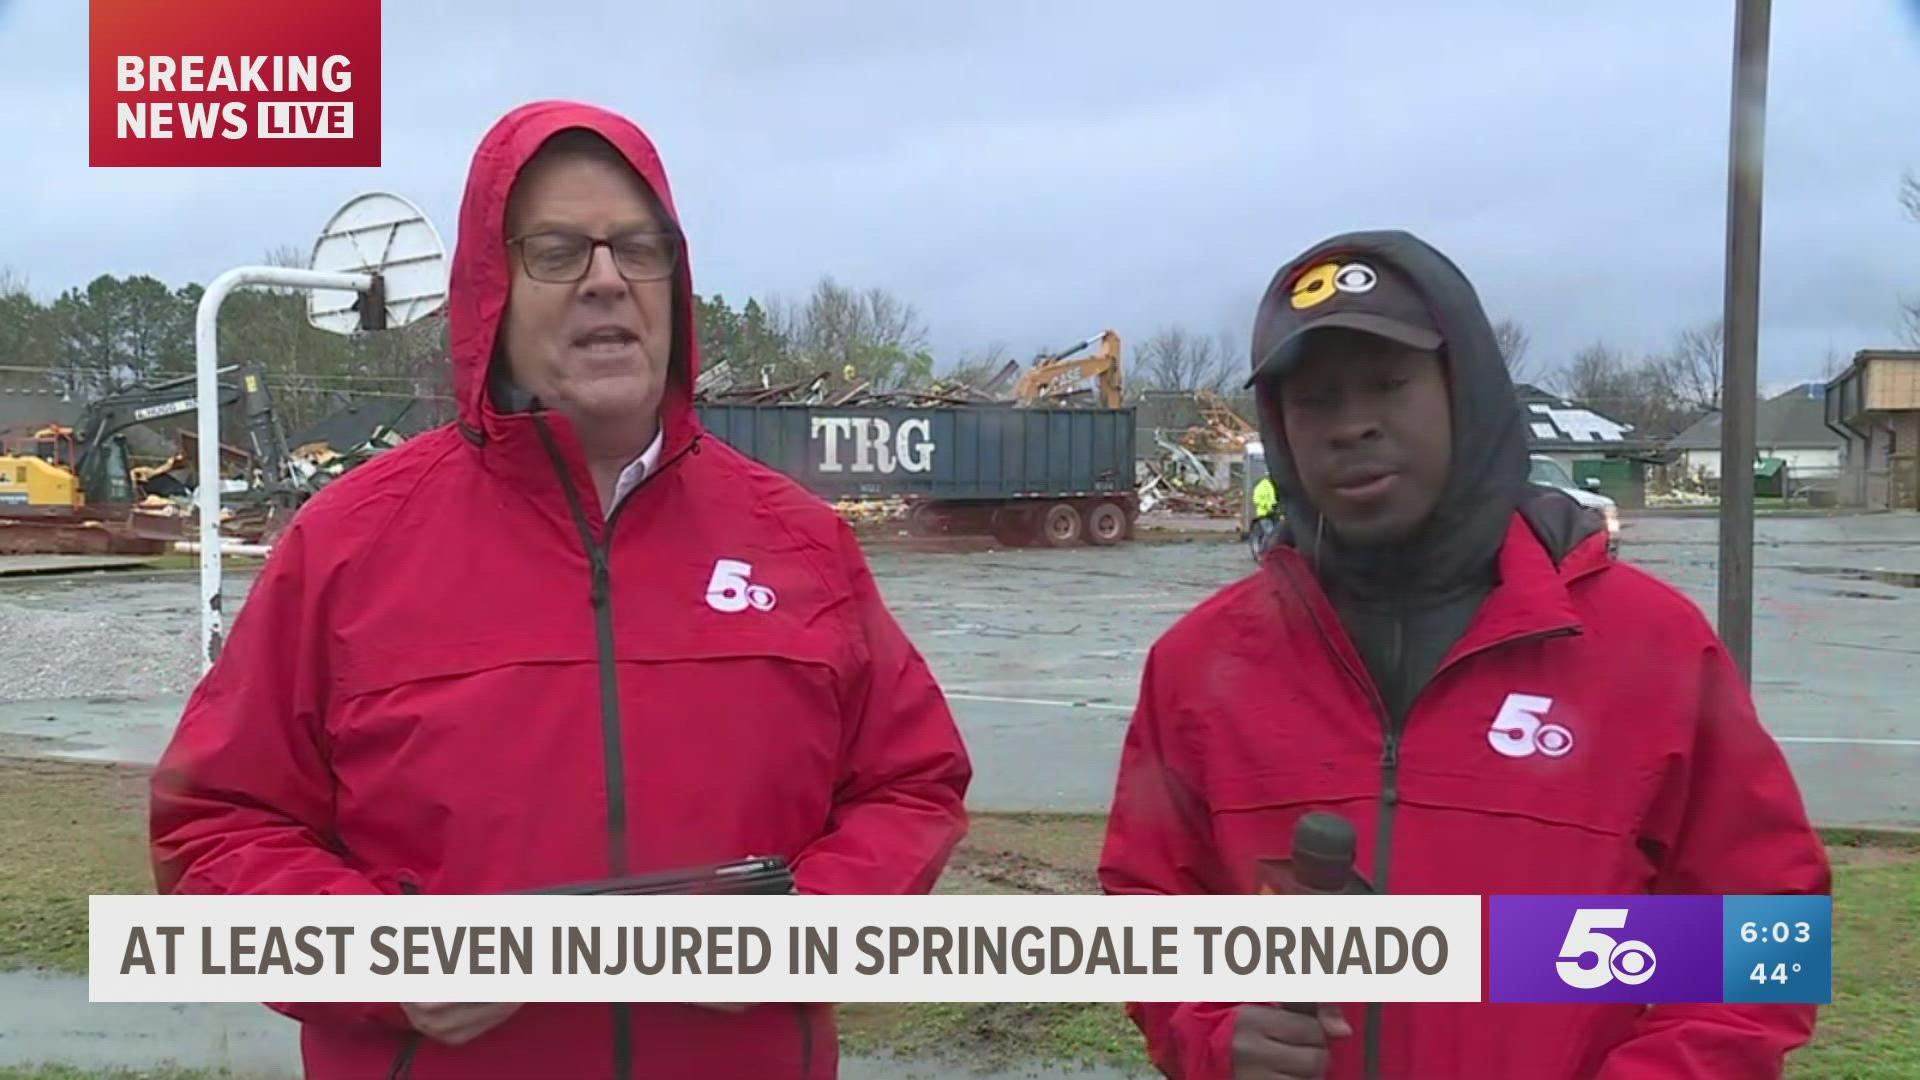 Follow along with 5NEWs team coverage of the tornado damage left across Springdale and other parts of Northwest Arkansas.